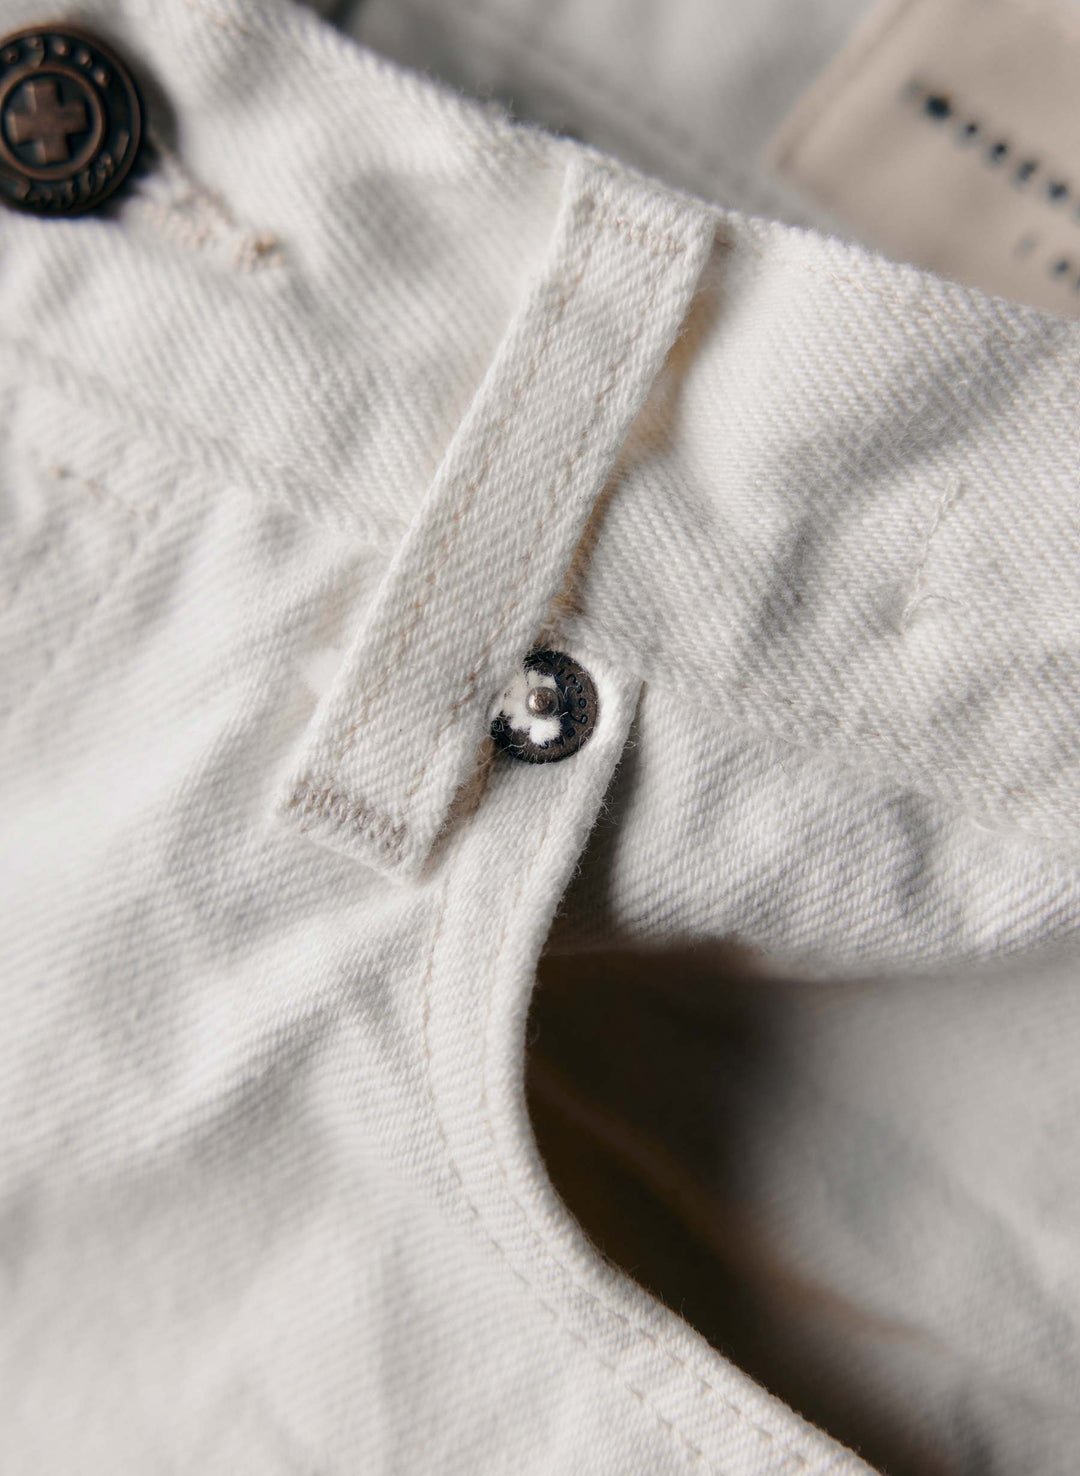 a close up of a button on a white pants